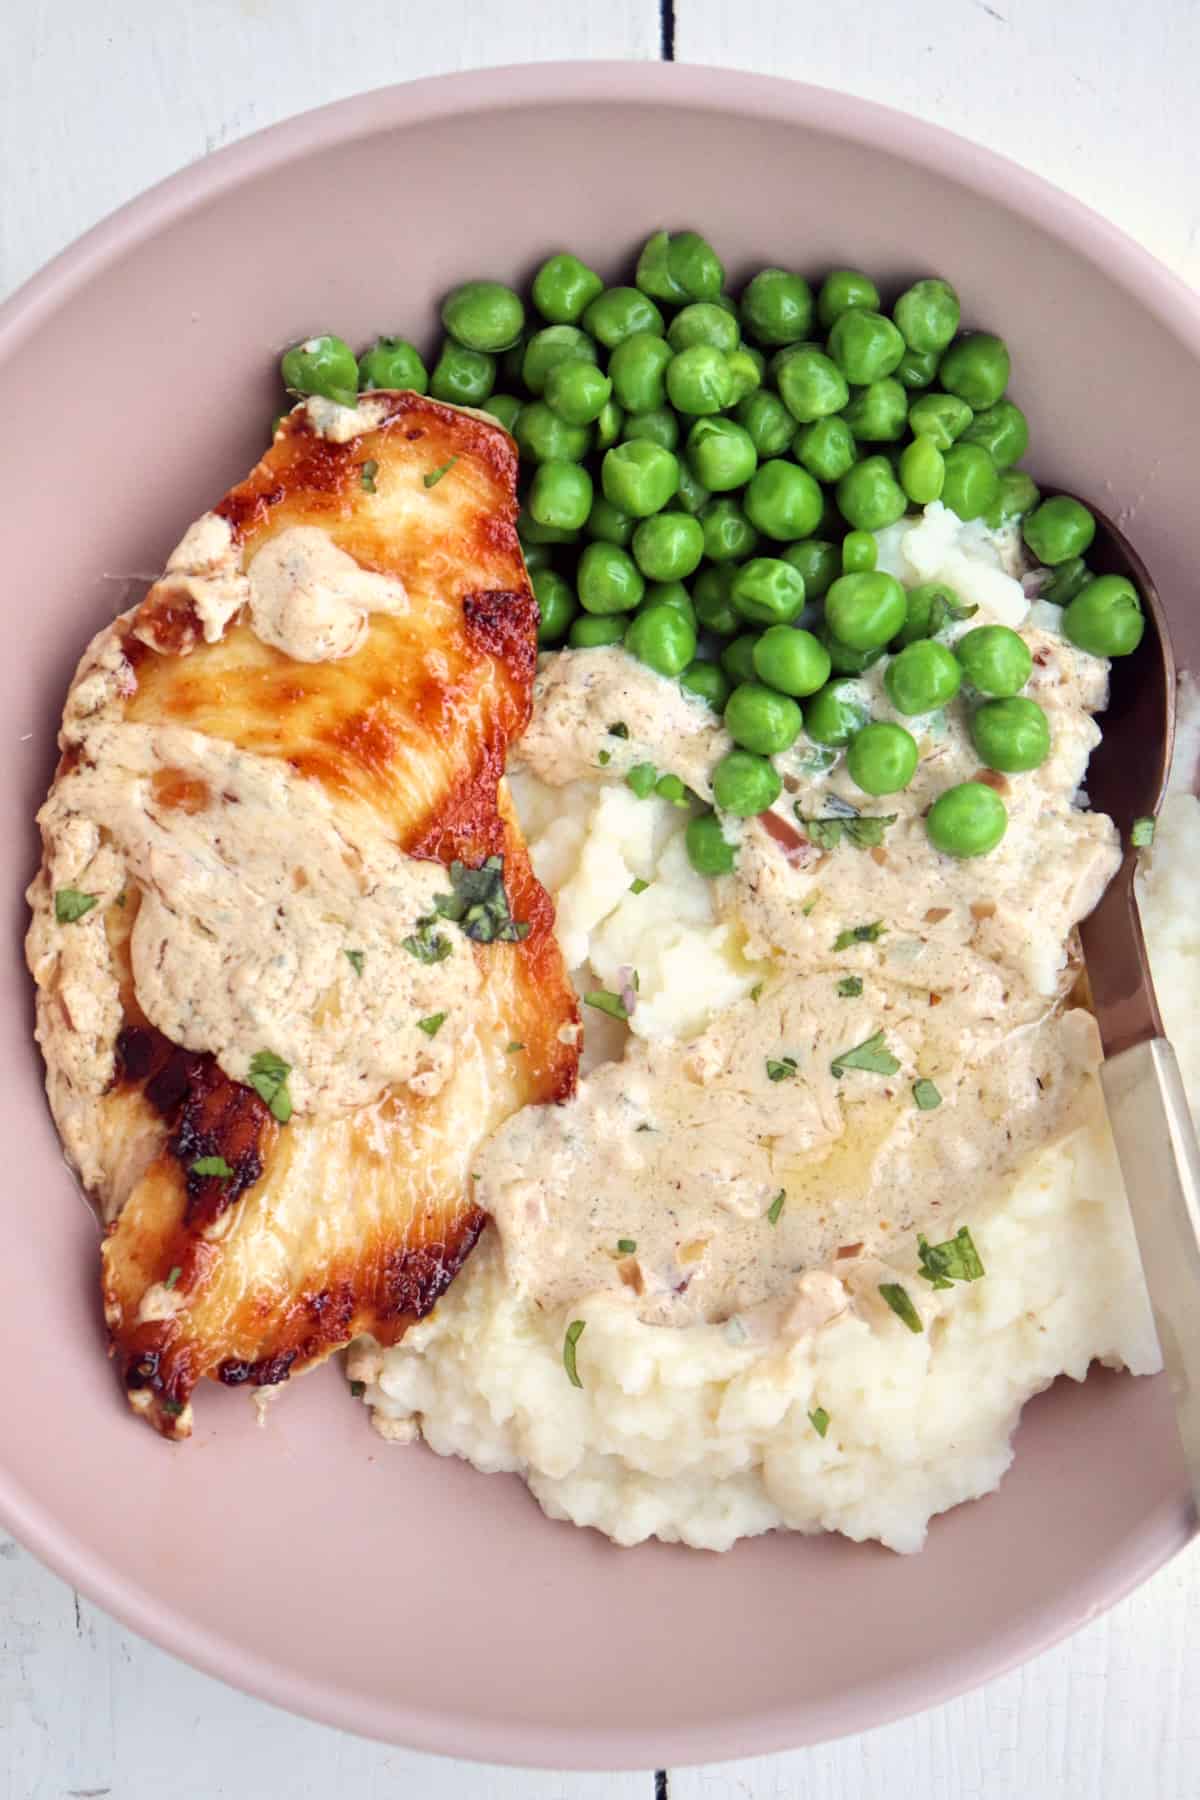 browned chicken with boursin sauce, mashed potatoes, and peas in a pink bowl.